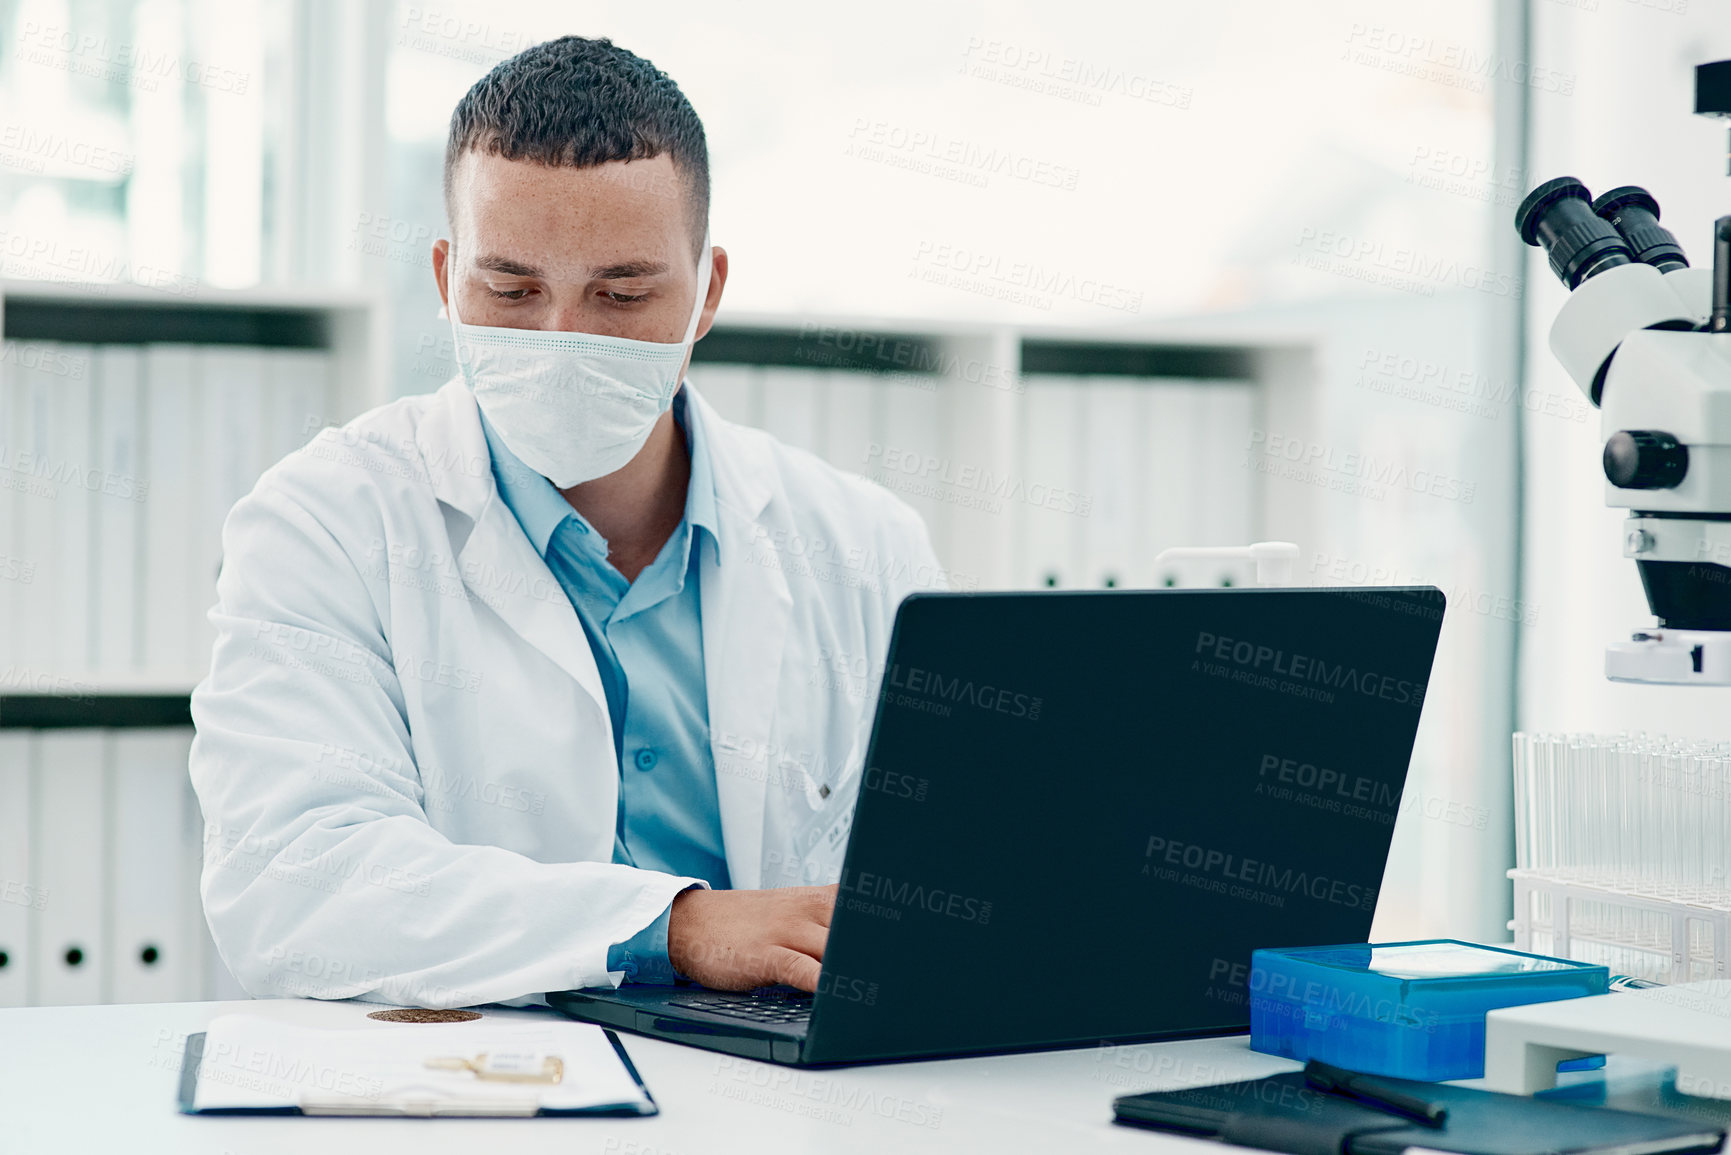 Buy stock photo Shot of a young scientist using a laptop while working on a coronavirus cure in a laboratory